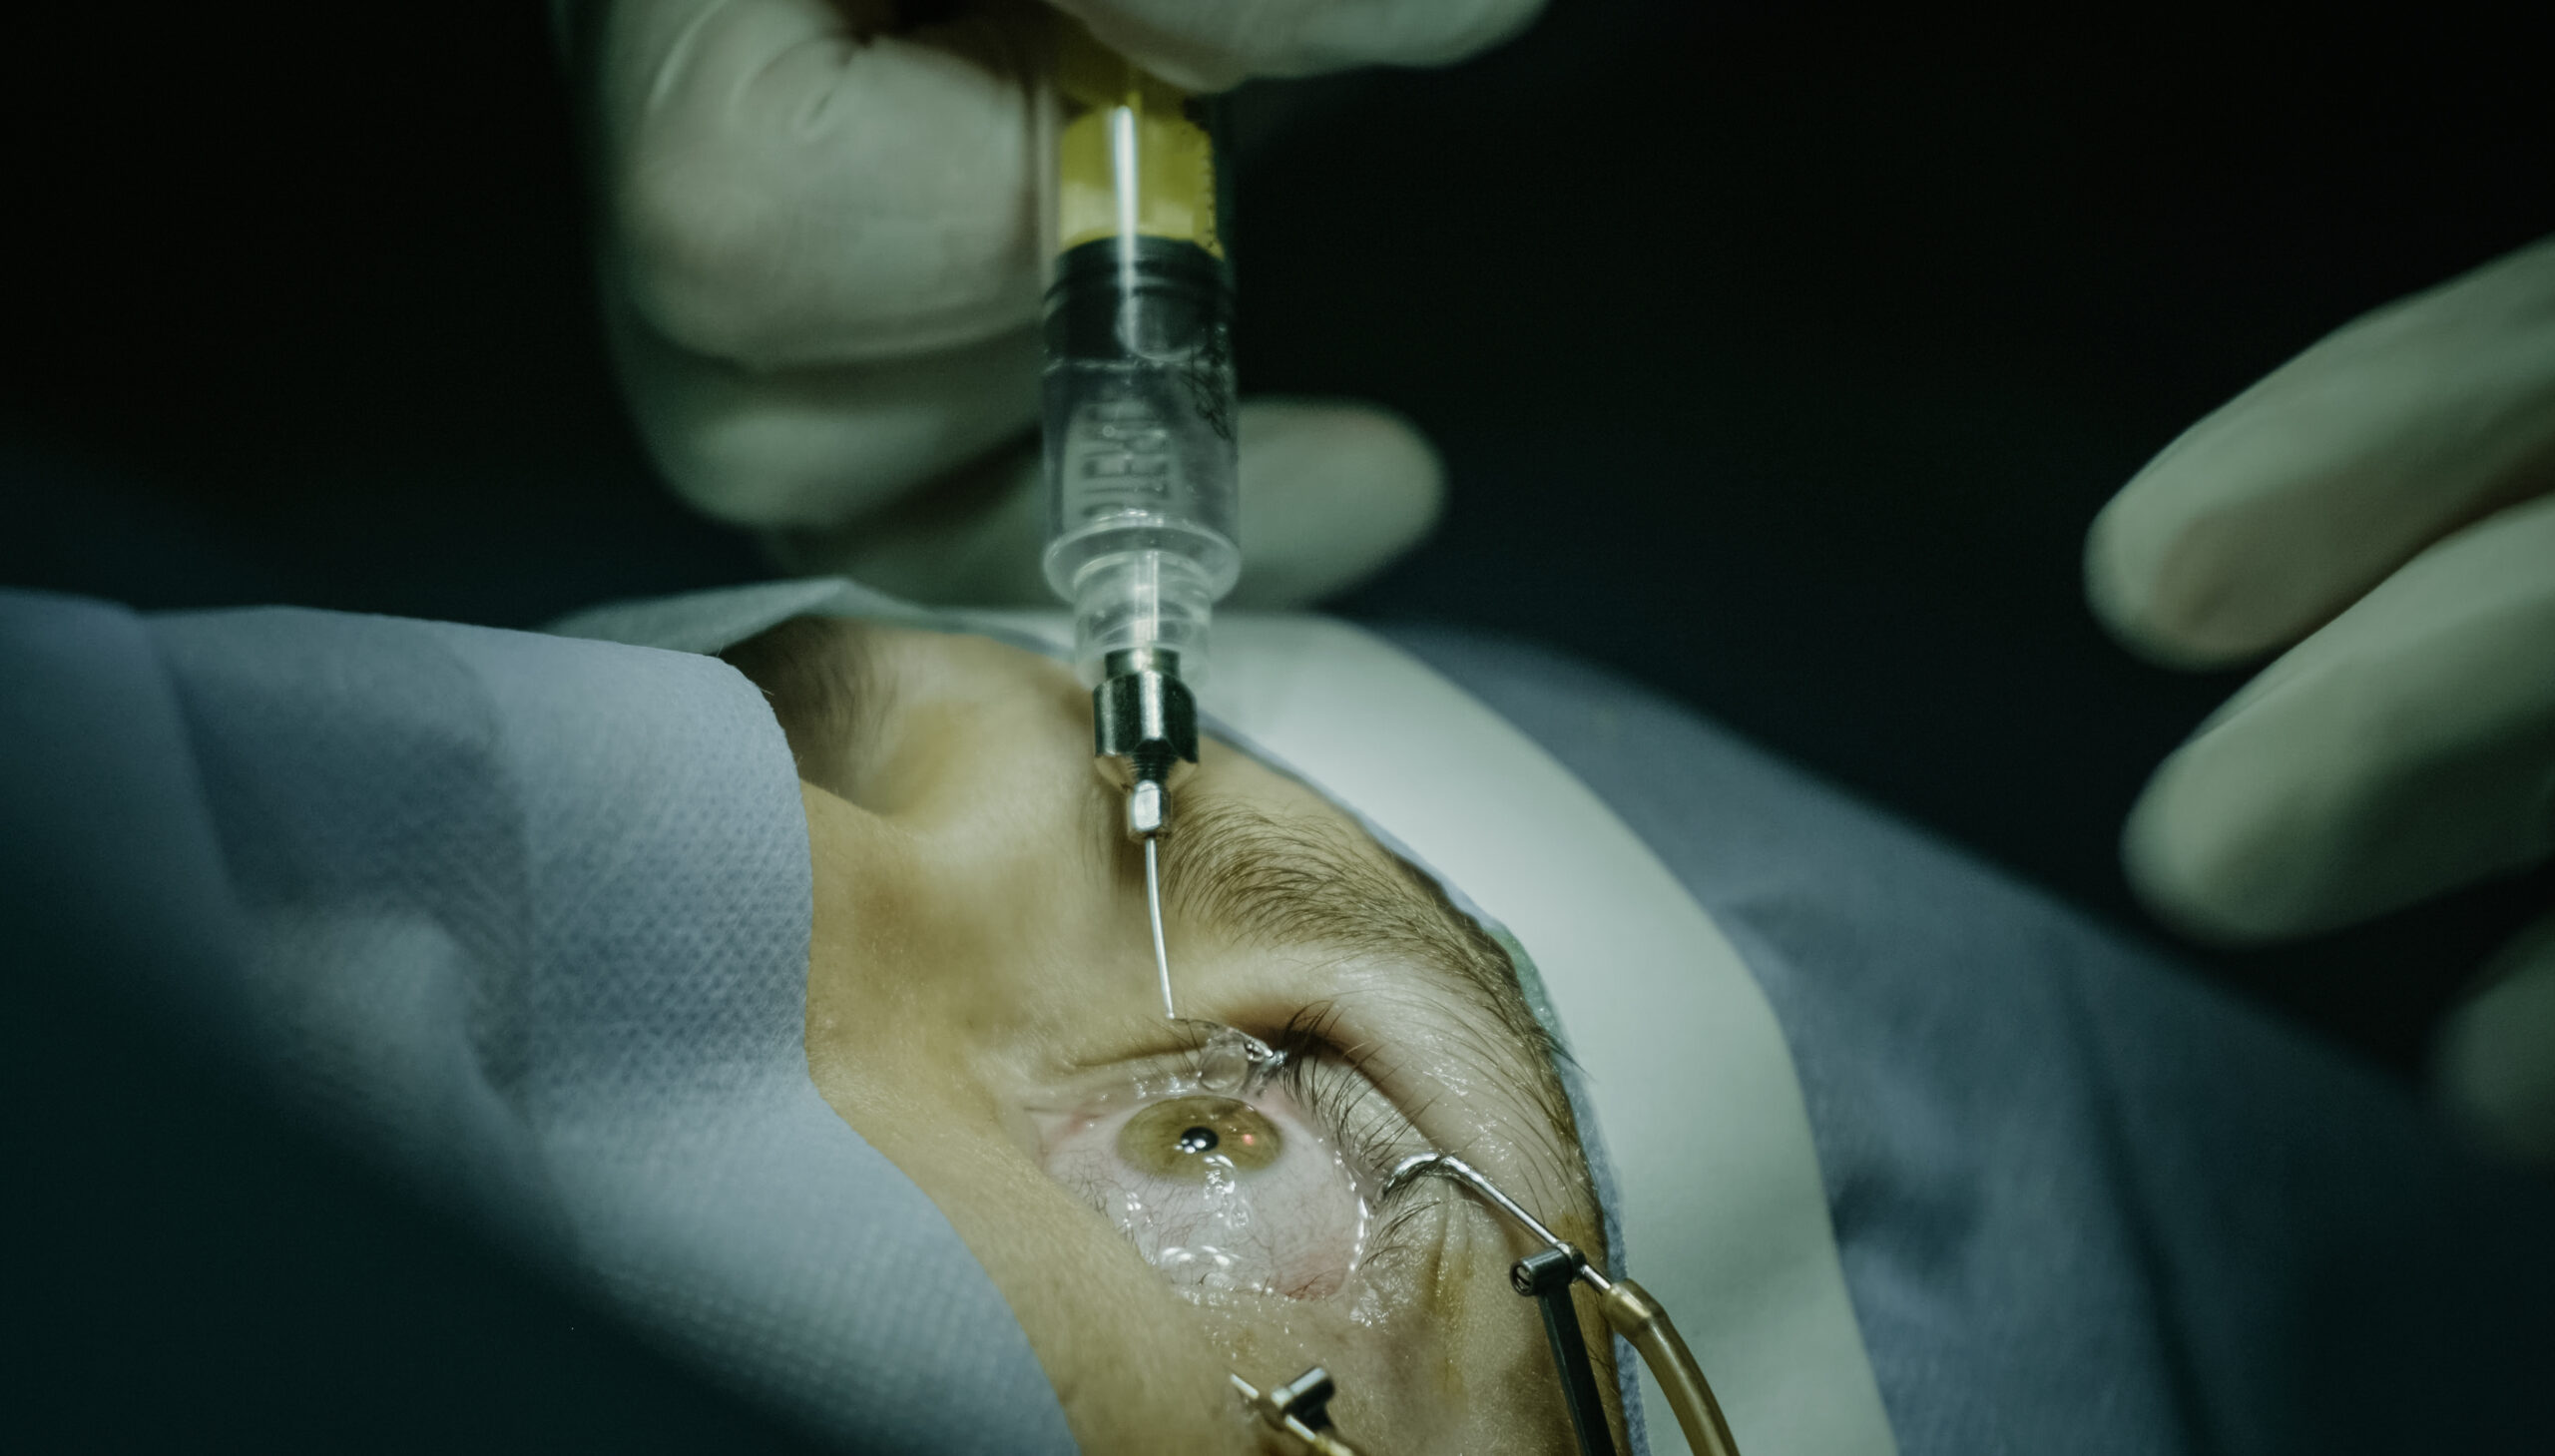 Treatment of an eye in operating room